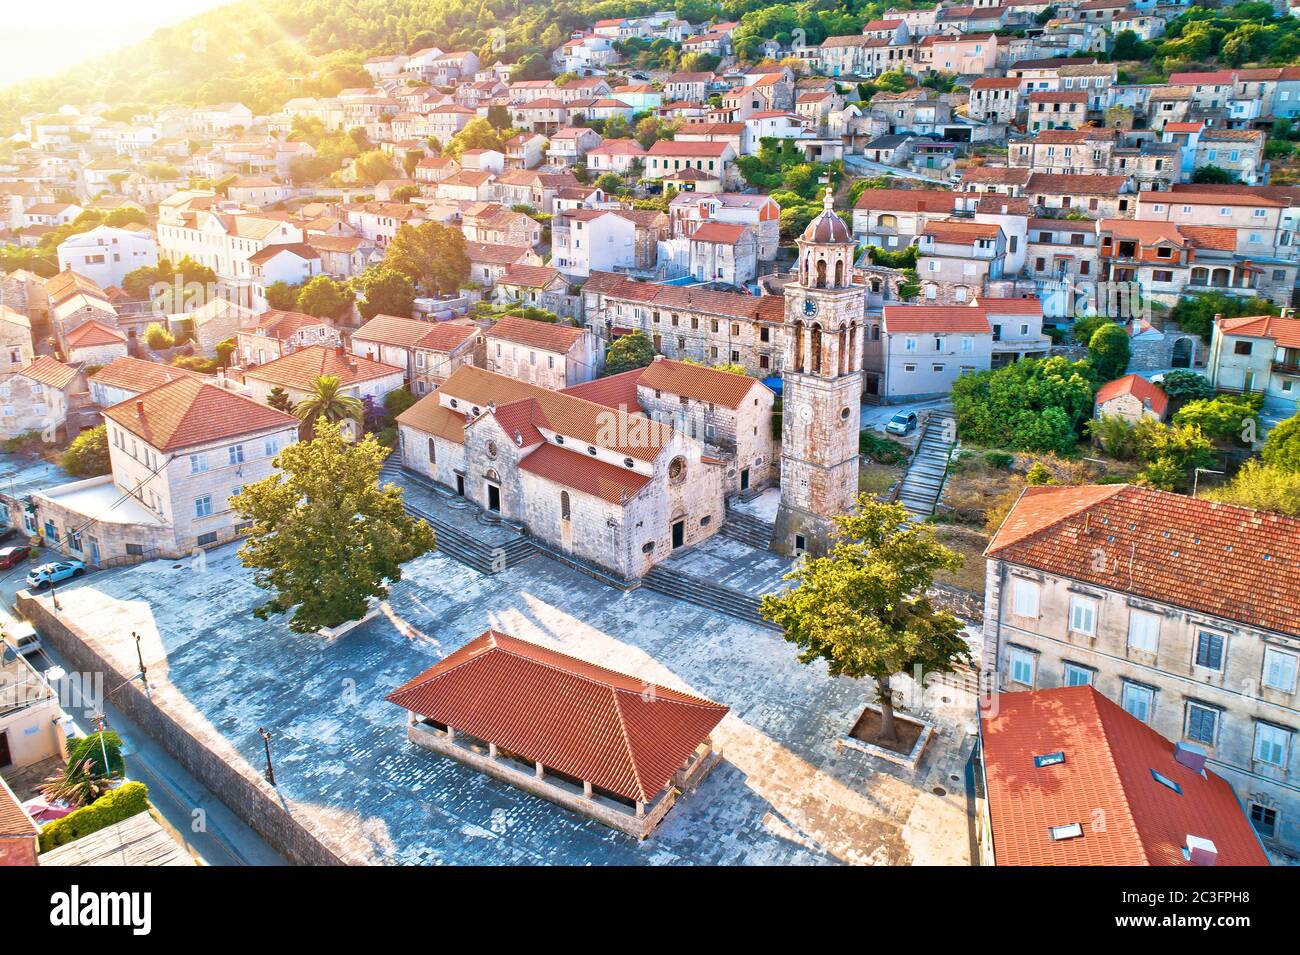 Blato on Korcula island historic town stone square and church aerial view Stock Photo